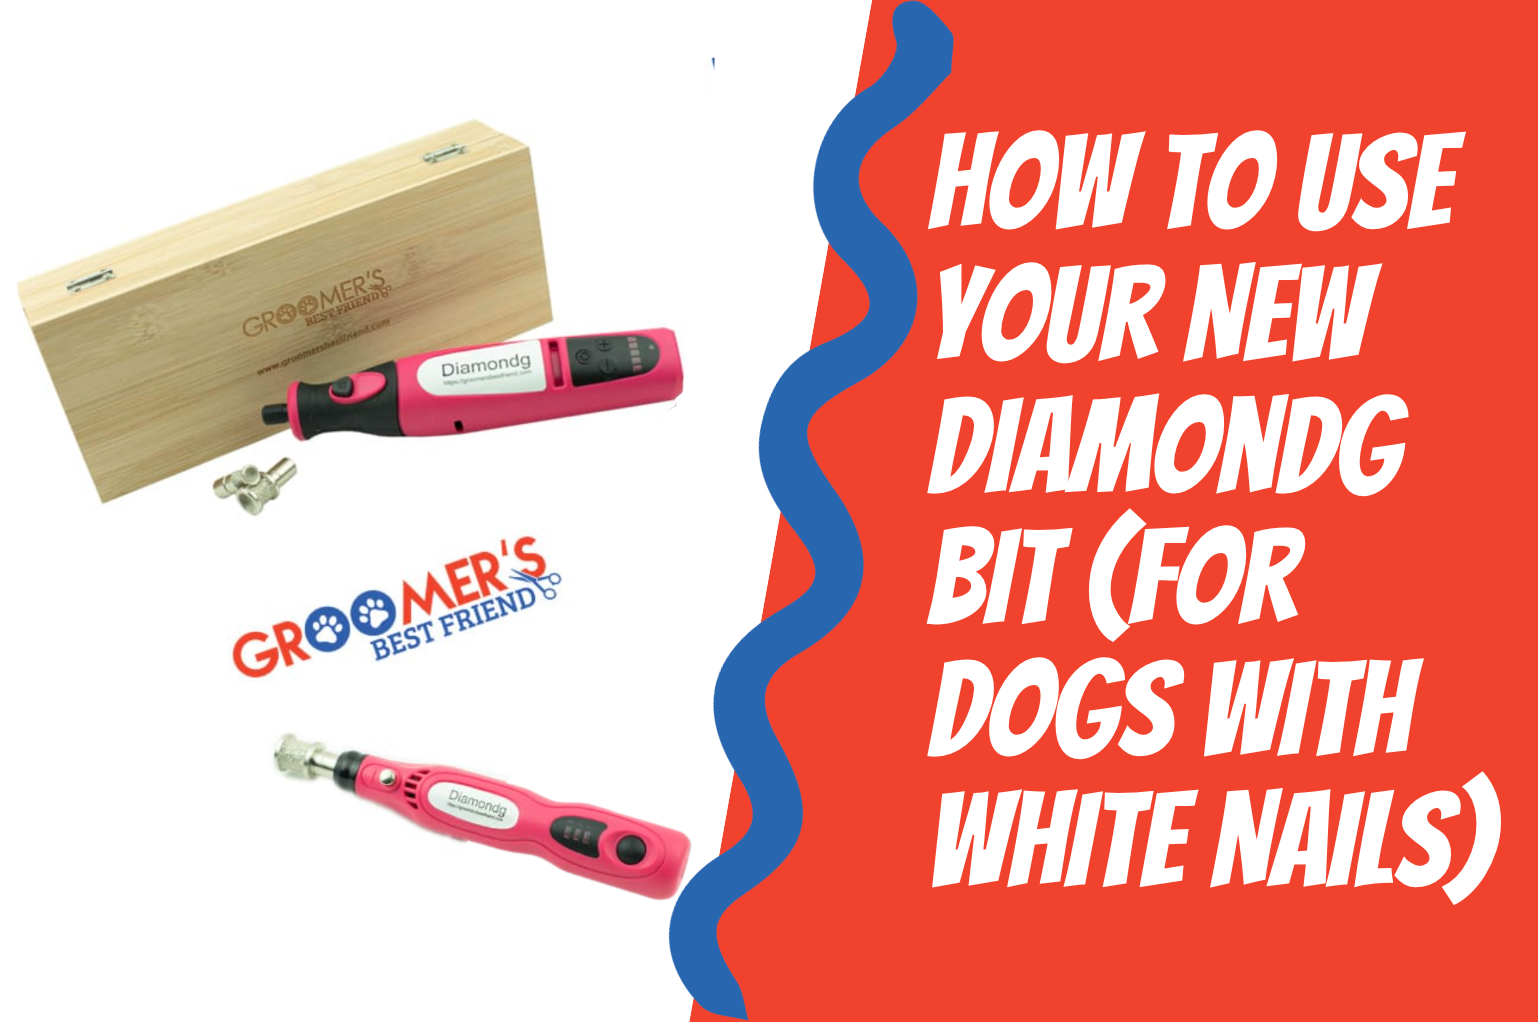 Load video: How To Use Your New Diamondg Bit (For Dogs With White Nails)